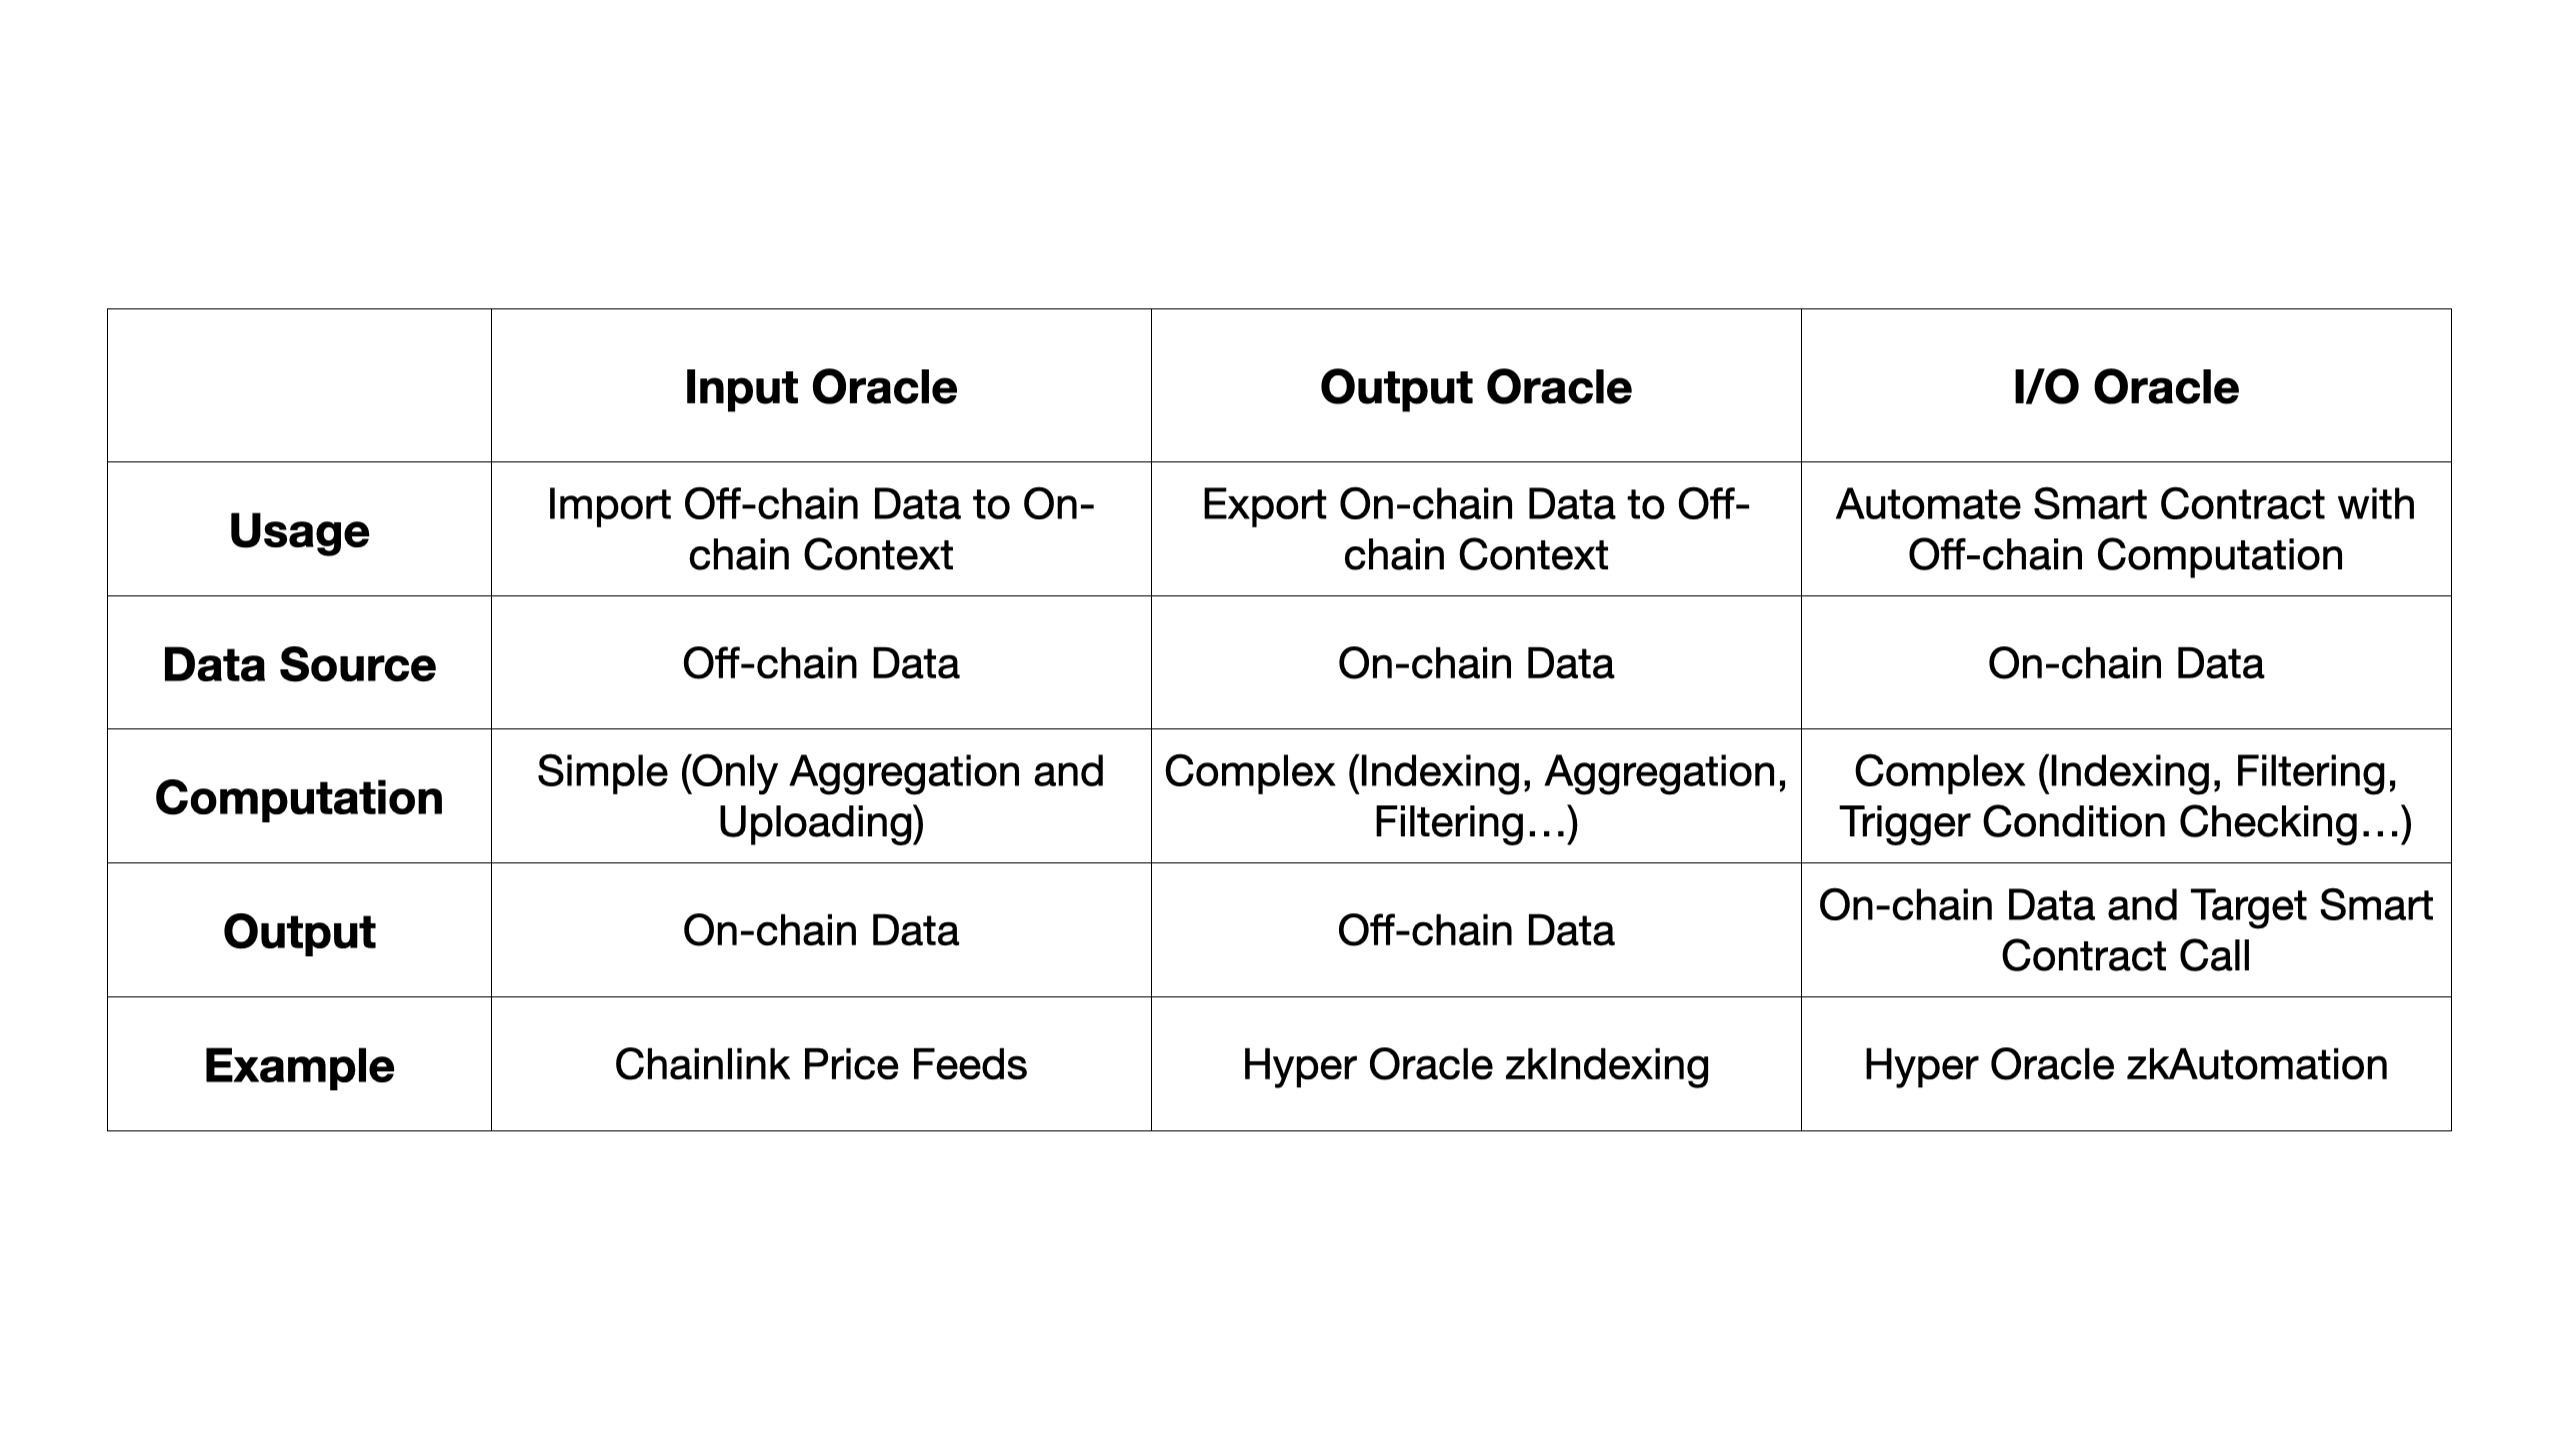 Comparison of Oracle Types